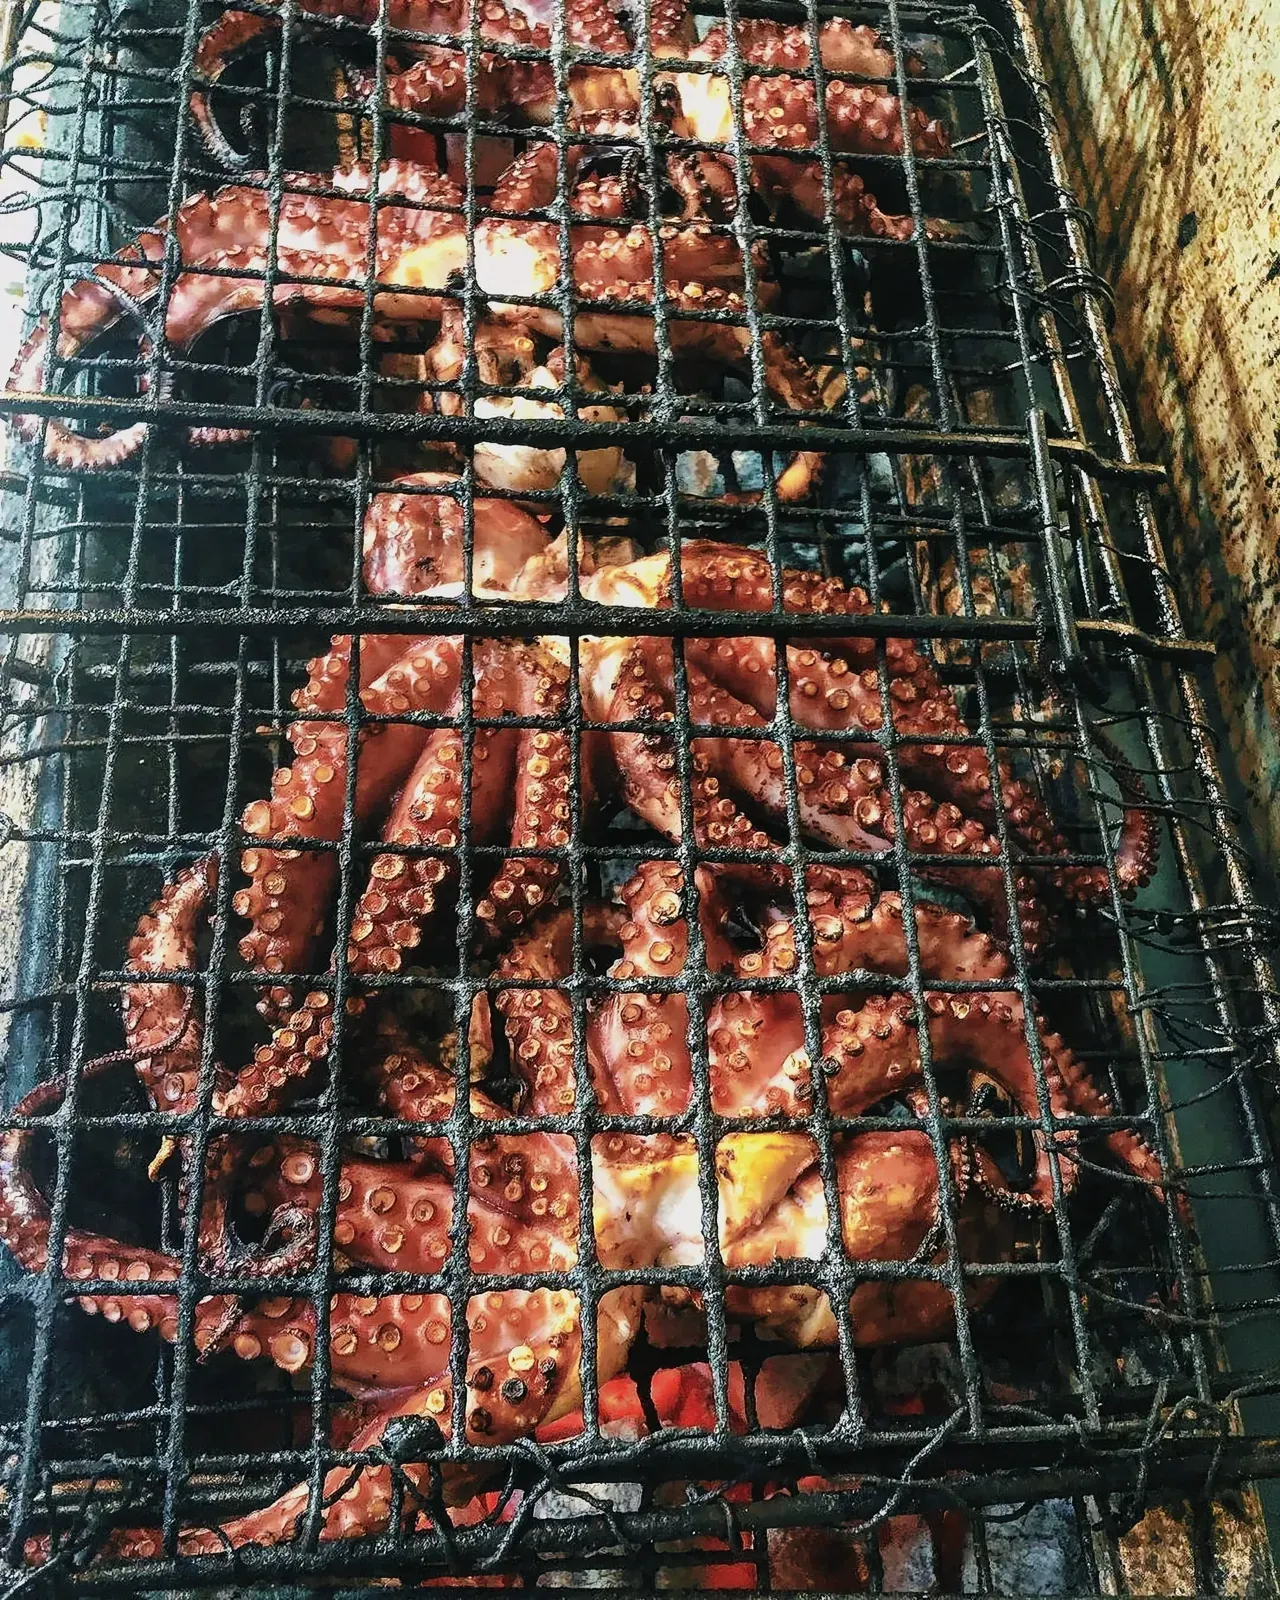 Grilled octopuses on a barbecue grill